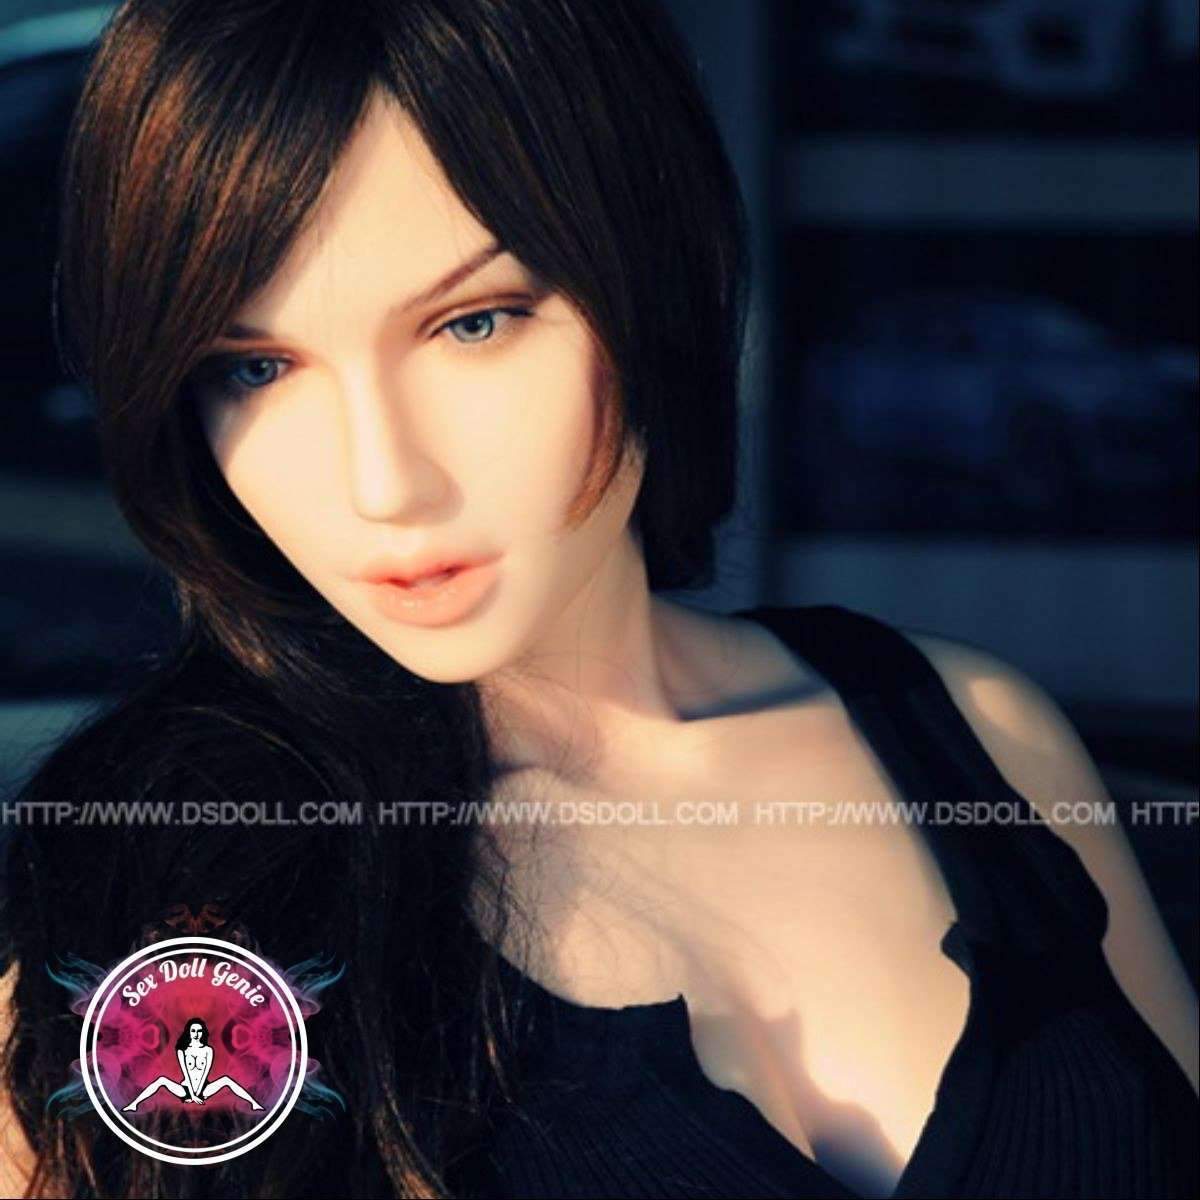 DS Doll - 160Plus - Sandy Head - Type 1 D Cup Silicone Doll-1